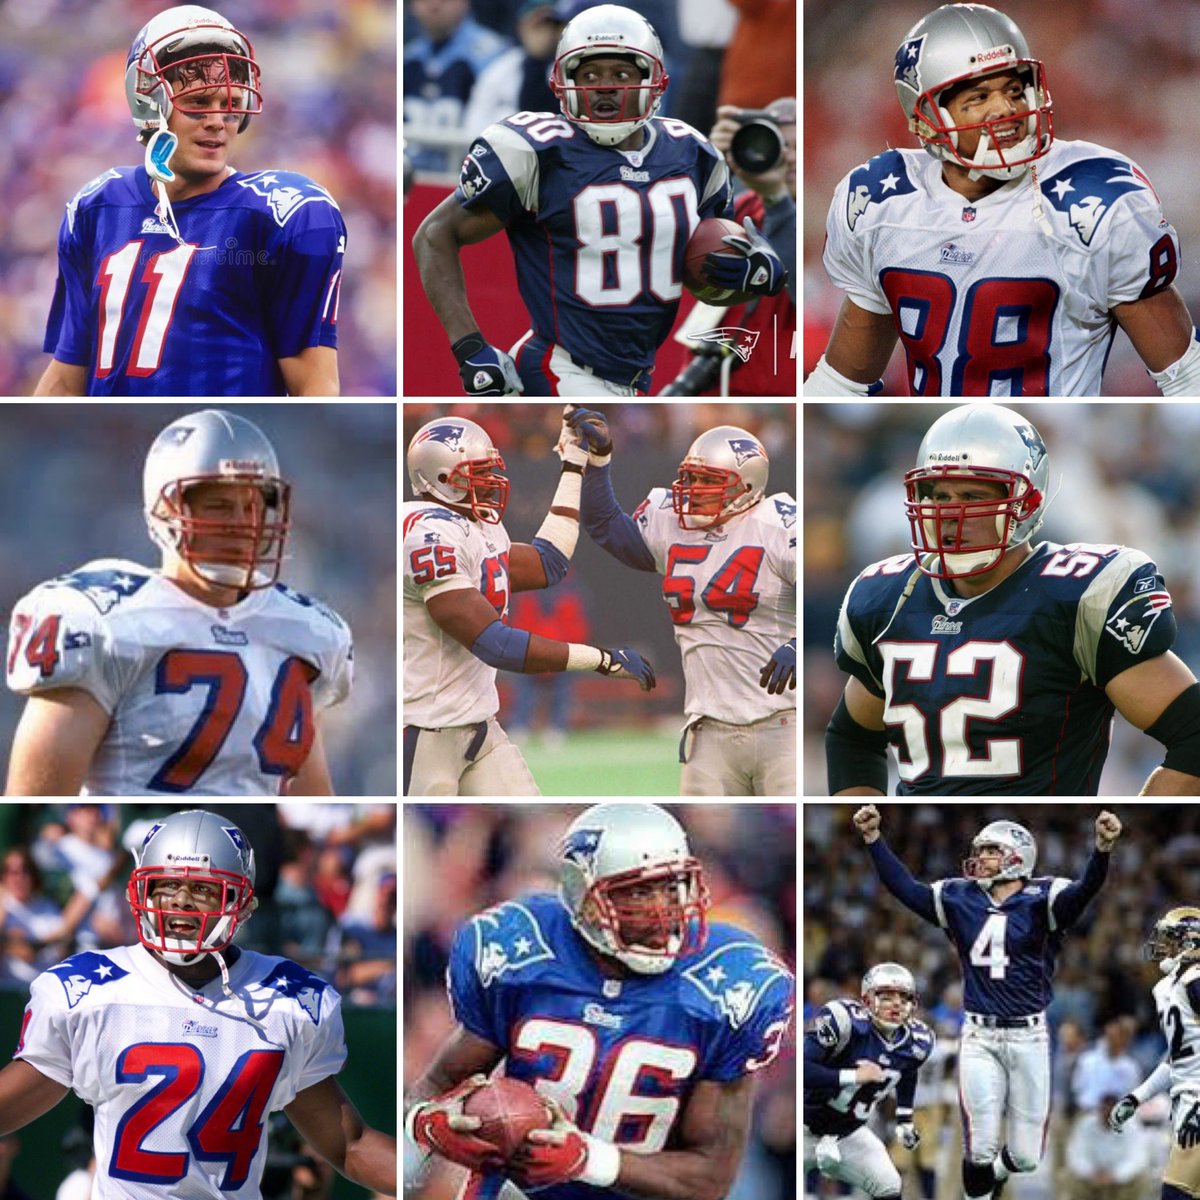 Brady & Belichick get most of the credit for turning around the Patriots franchise; but 10 Pats who played in both Super Bowls 31 & 36 deserve some:

Drew Bledsoe
Troy Brown
Terry Glenn
Chris Sullivan
Willie McGinest
Tedy Bruschi
Ted Johnson 
Ty Law
Lawyer Milloy 
Adam Vinatieri https://t.co/llyIow7pim